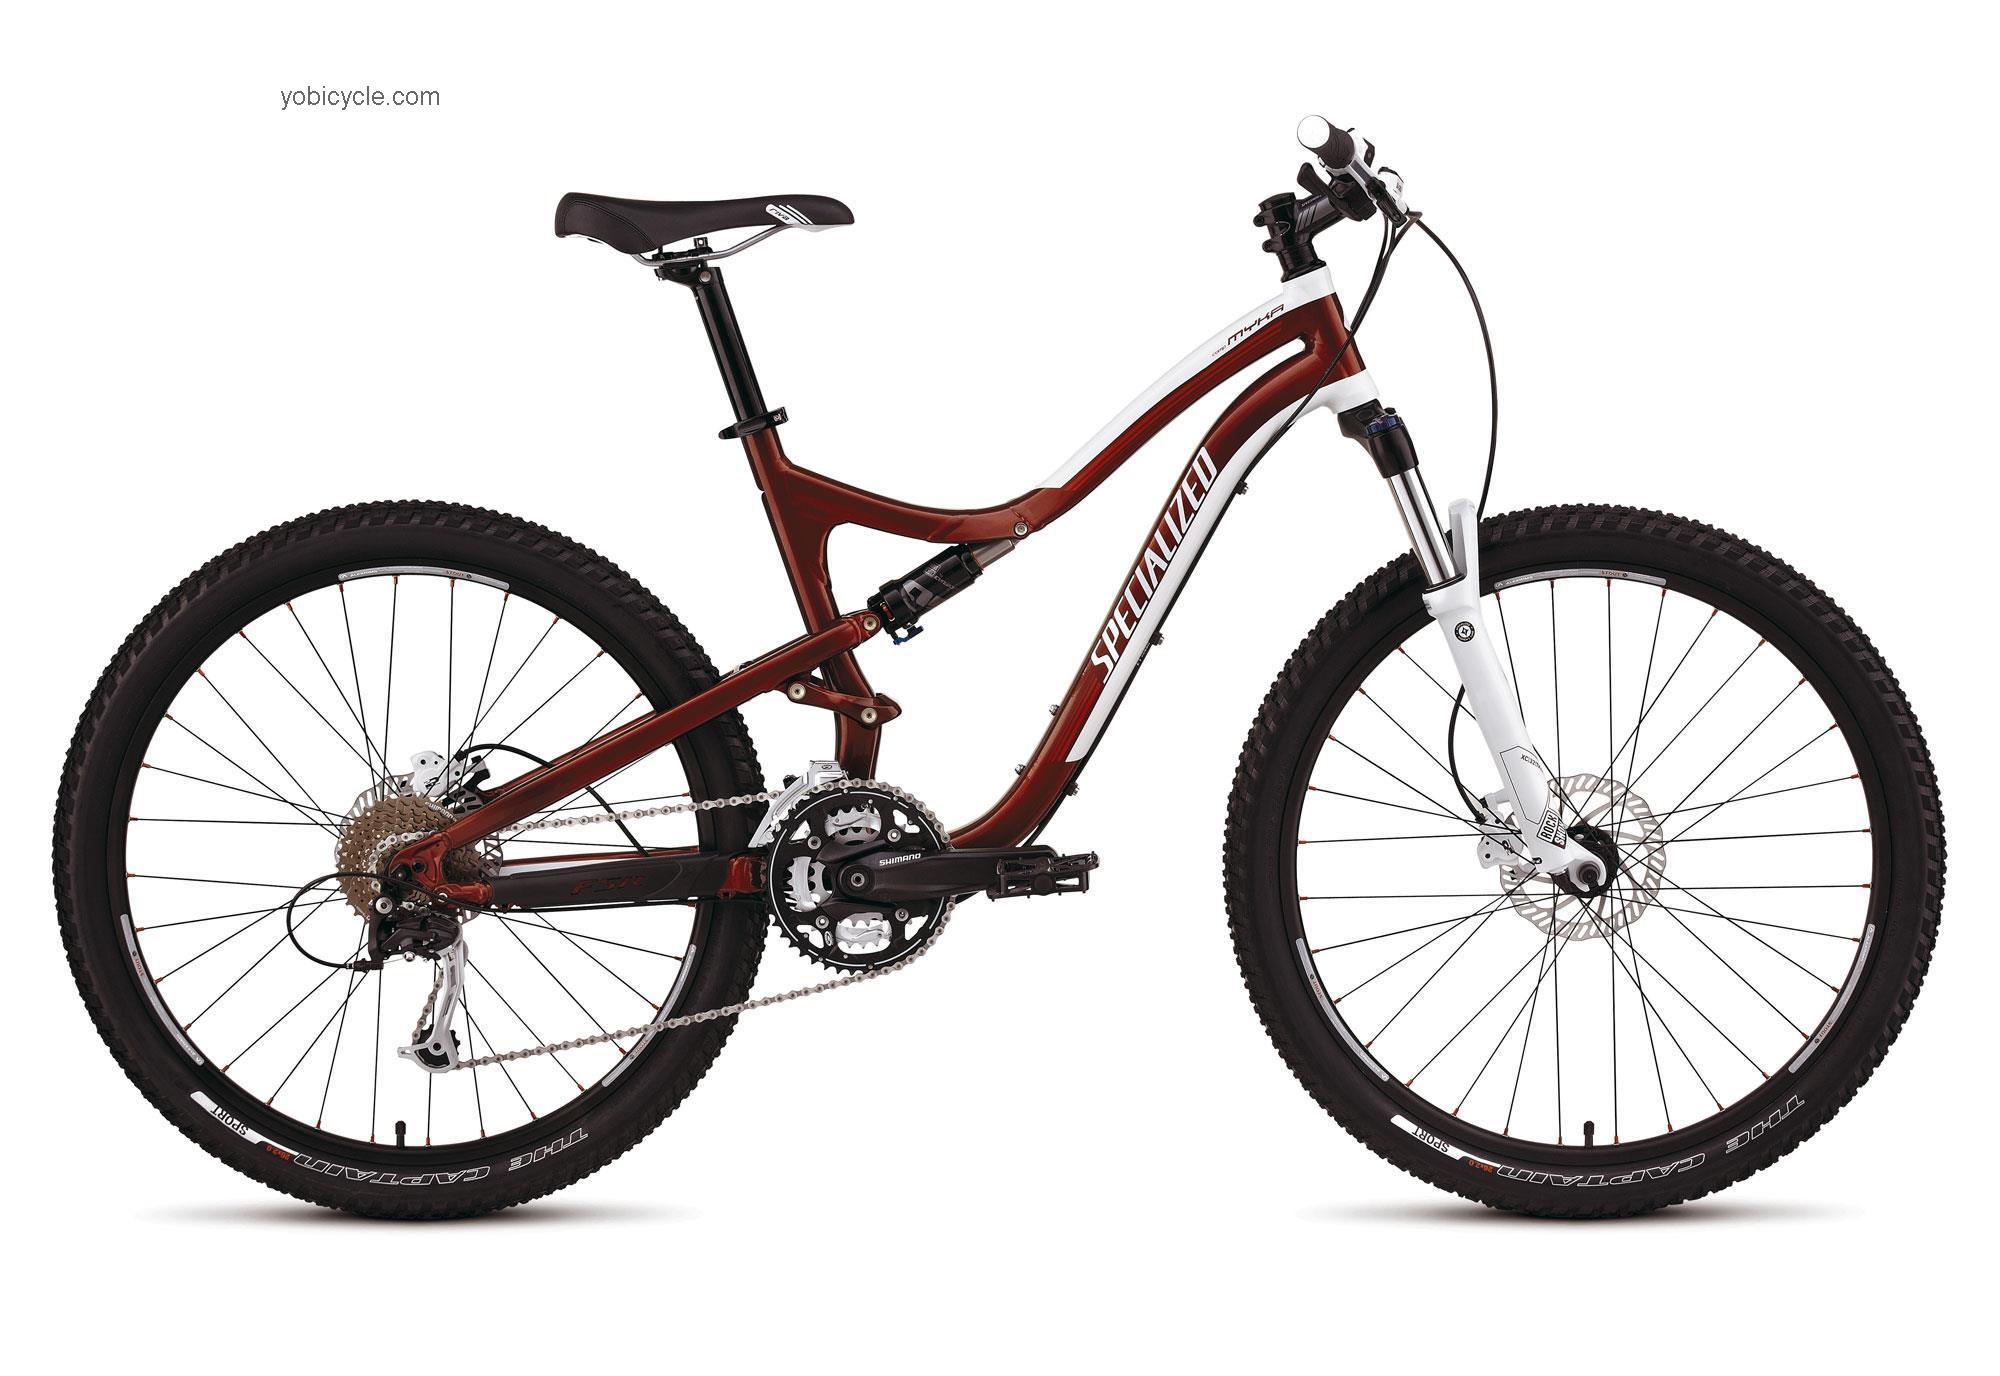 Specialized Myka FSR Comp 2012 comparison online with competitors